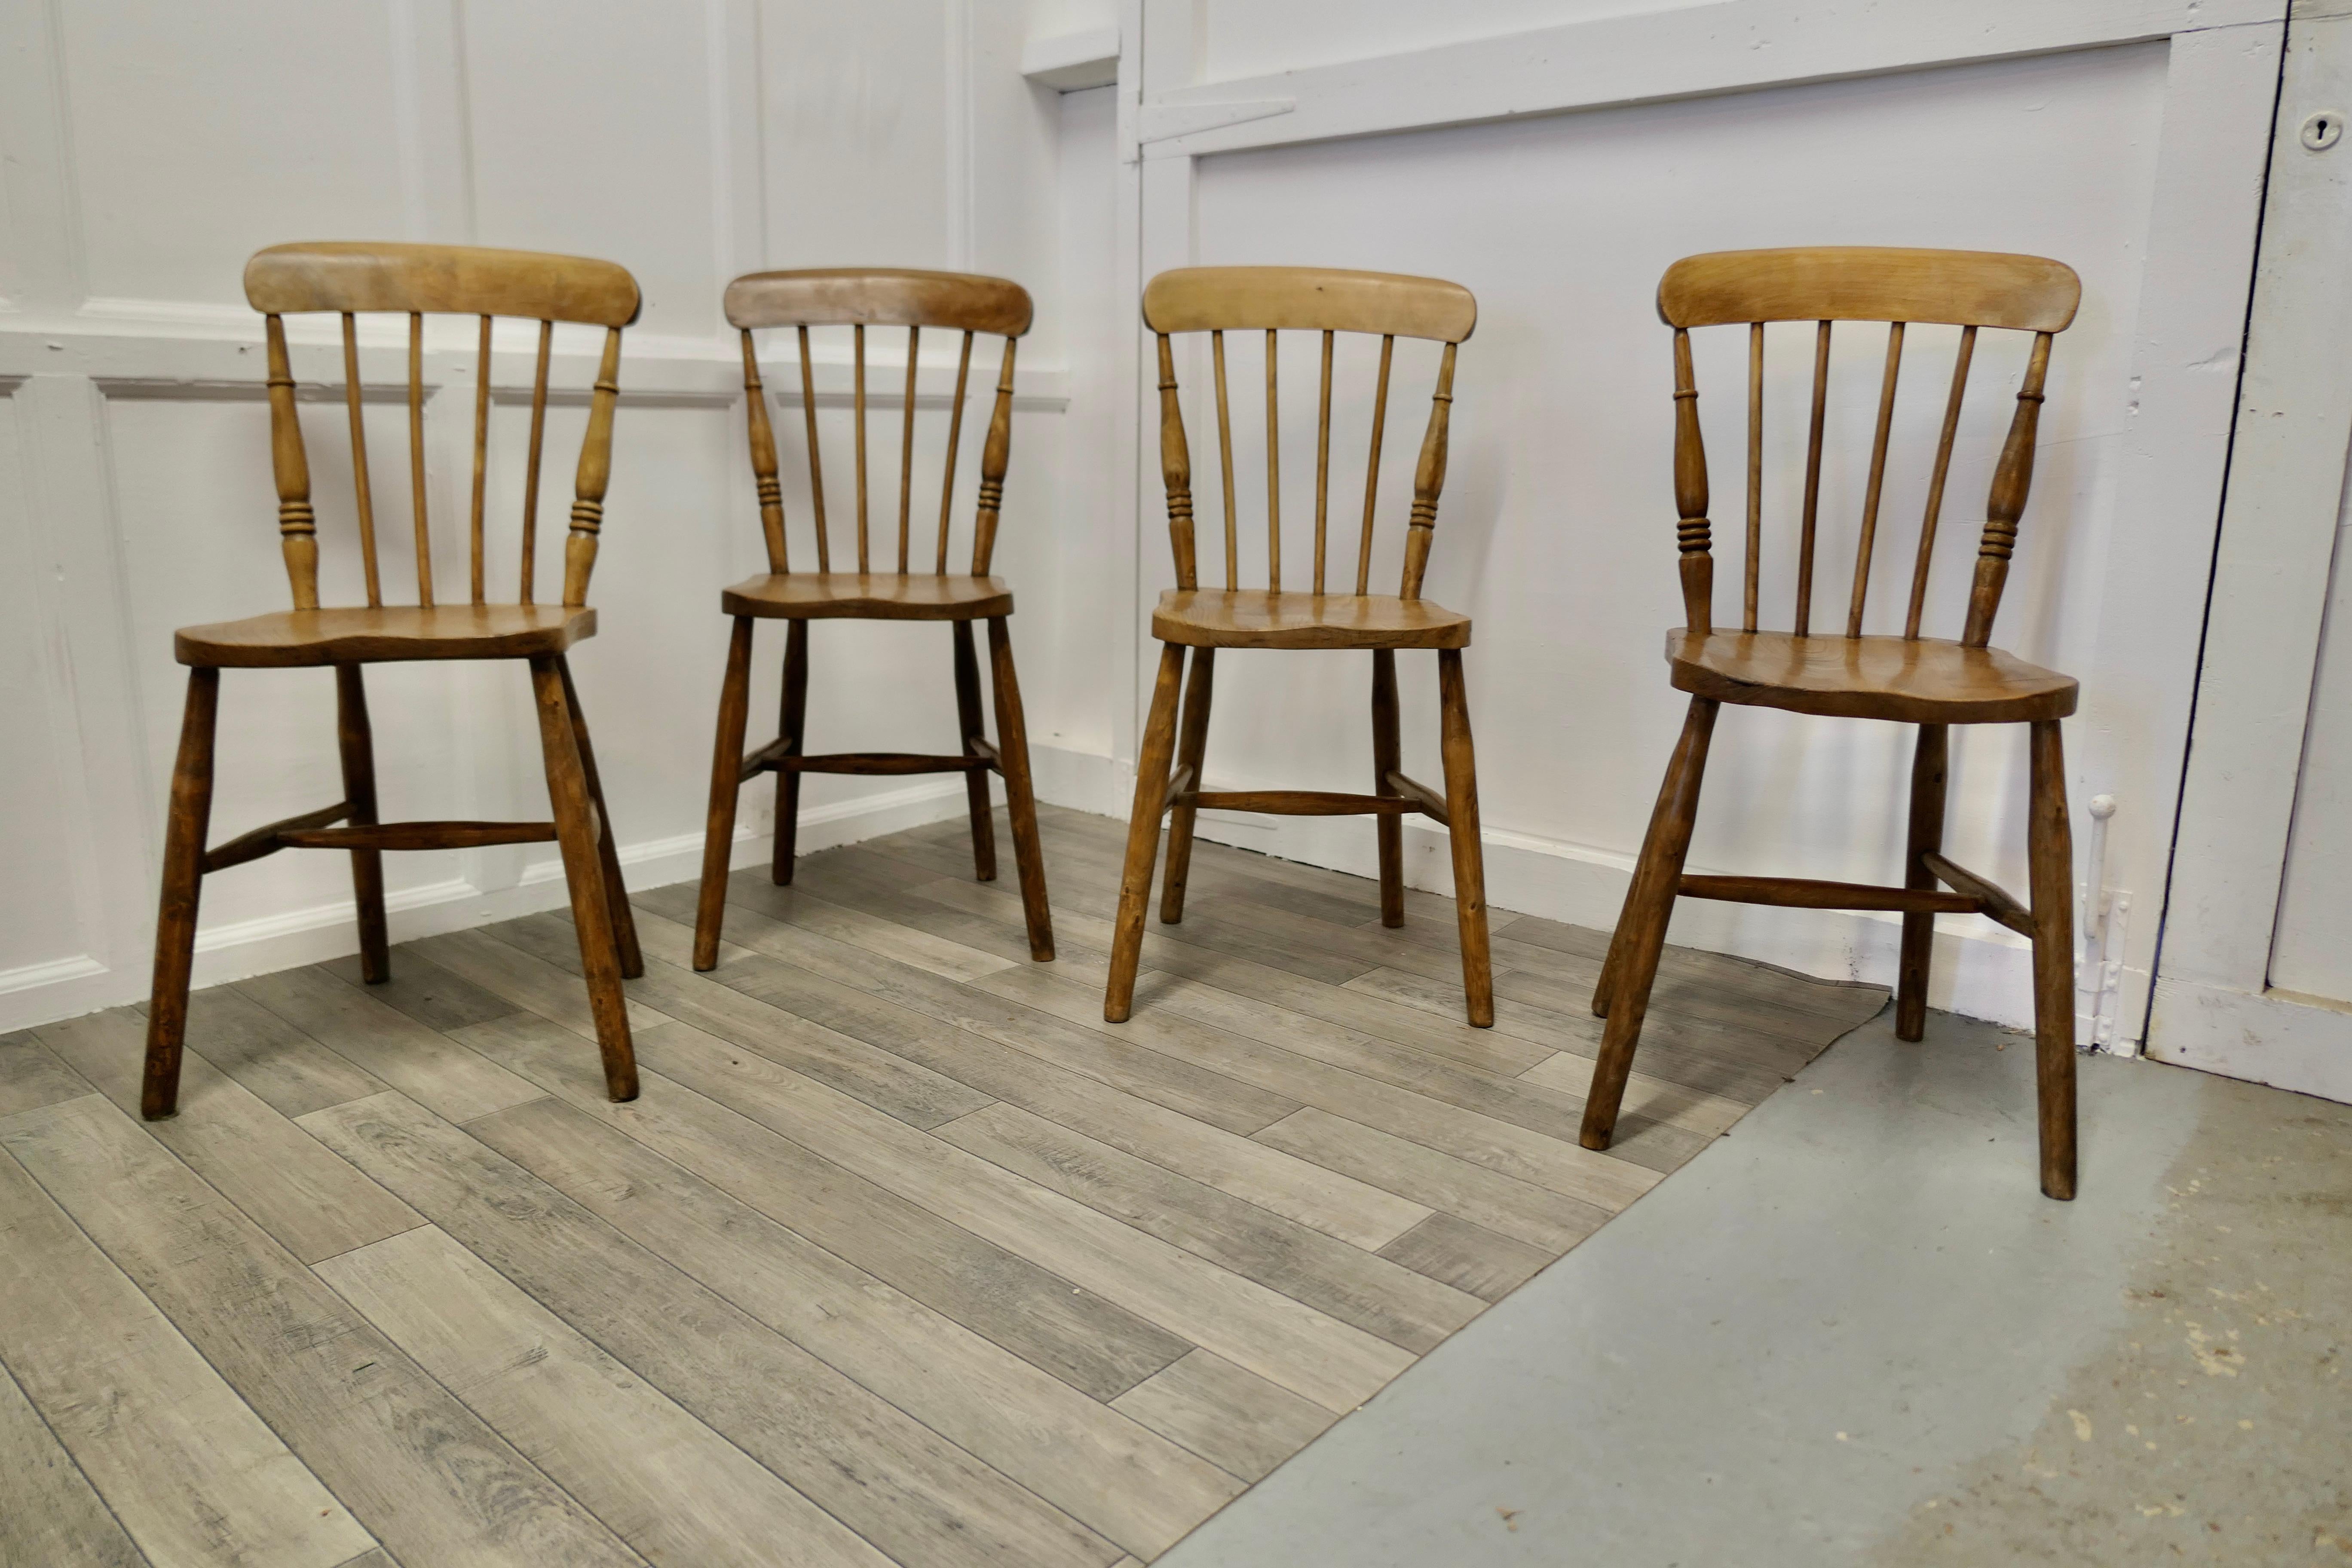 Set of 4 beech and elm seated stick back kitchen dining chairs.


The chairs are a classic design and traditionally made from solid wood they have a curved top rail back in the traditional style with spindles. 
These are a good set of chairs,